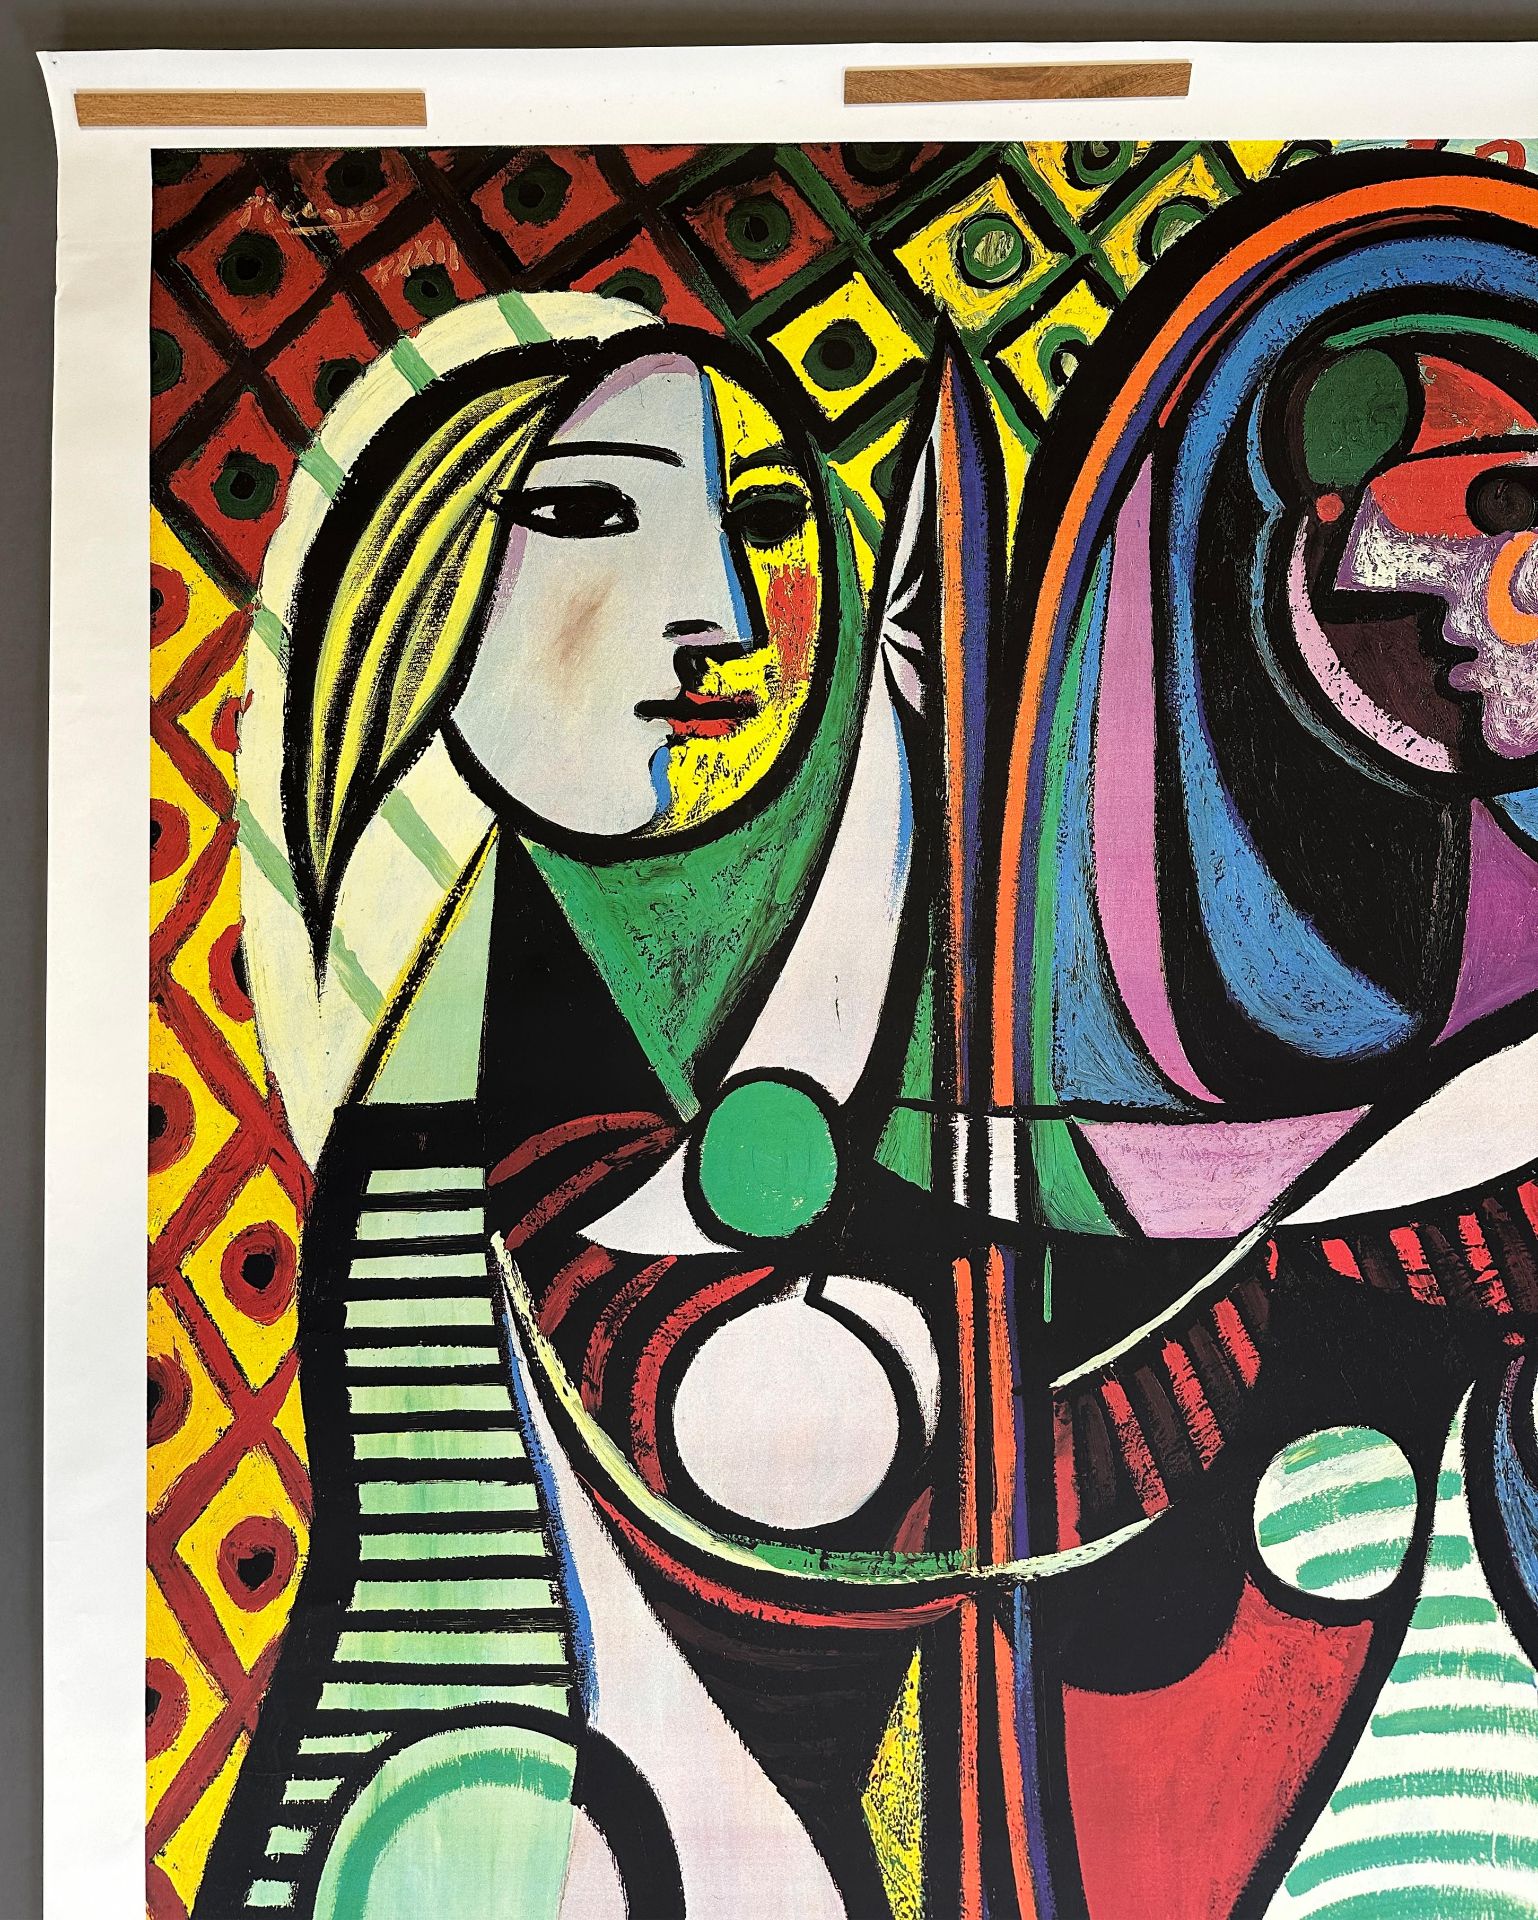 Pablo PICASSO (1881 - 1973). Poster. Museum of Modern Art. 1988. - Image 3 of 9